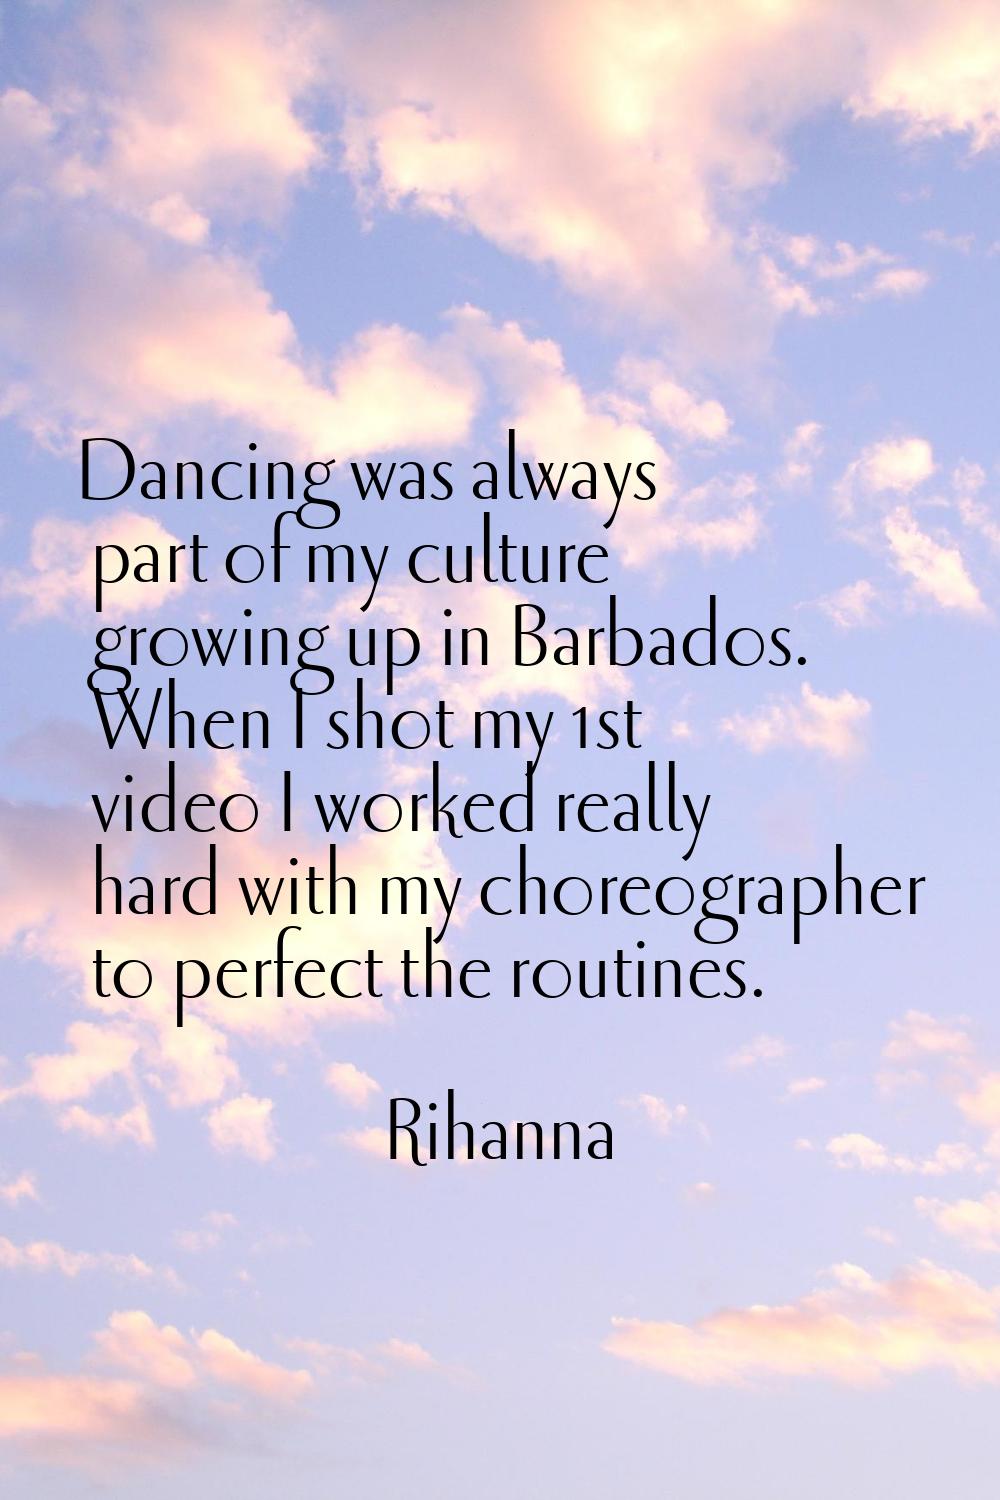 Dancing was always part of my culture growing up in Barbados. When I shot my 1st video I worked rea